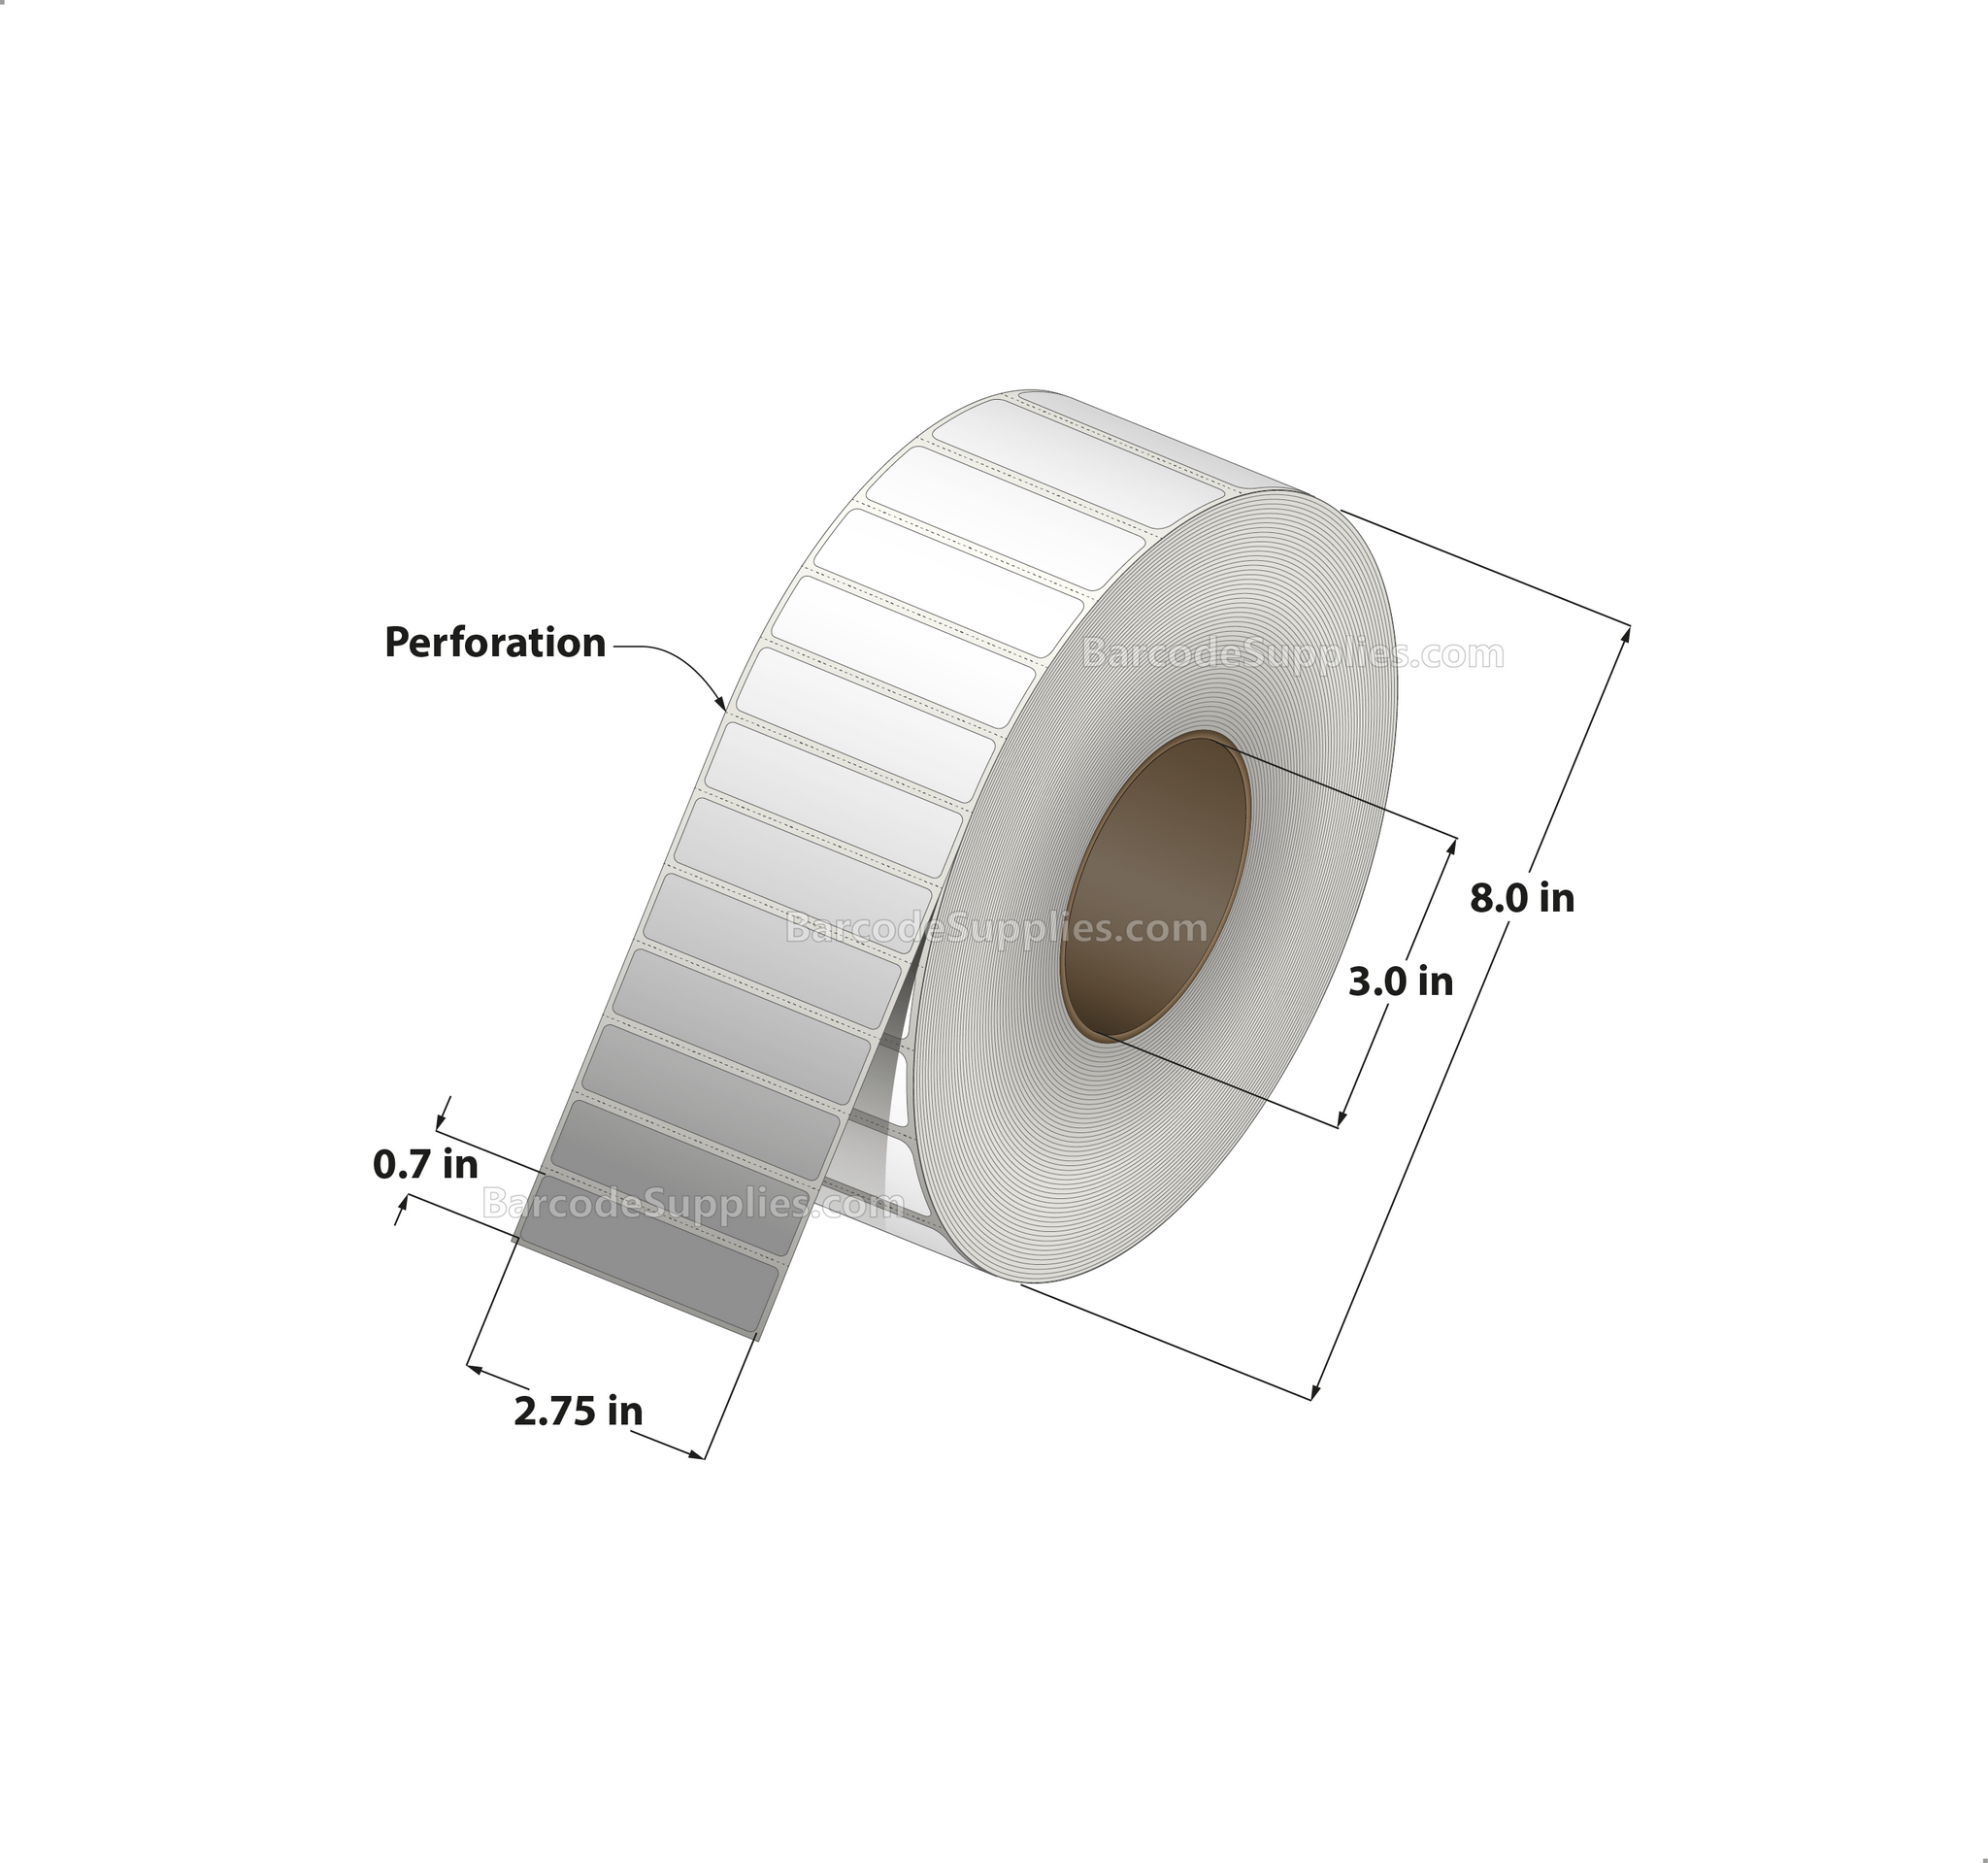 2.75 x 0.7 Thermal Transfer White Labels With Permanent Adhesive - Perforated - 5340 Labels Per Roll - Carton Of 8 Rolls - 42720 Labels Total - MPN: RT-275-07-5340-3